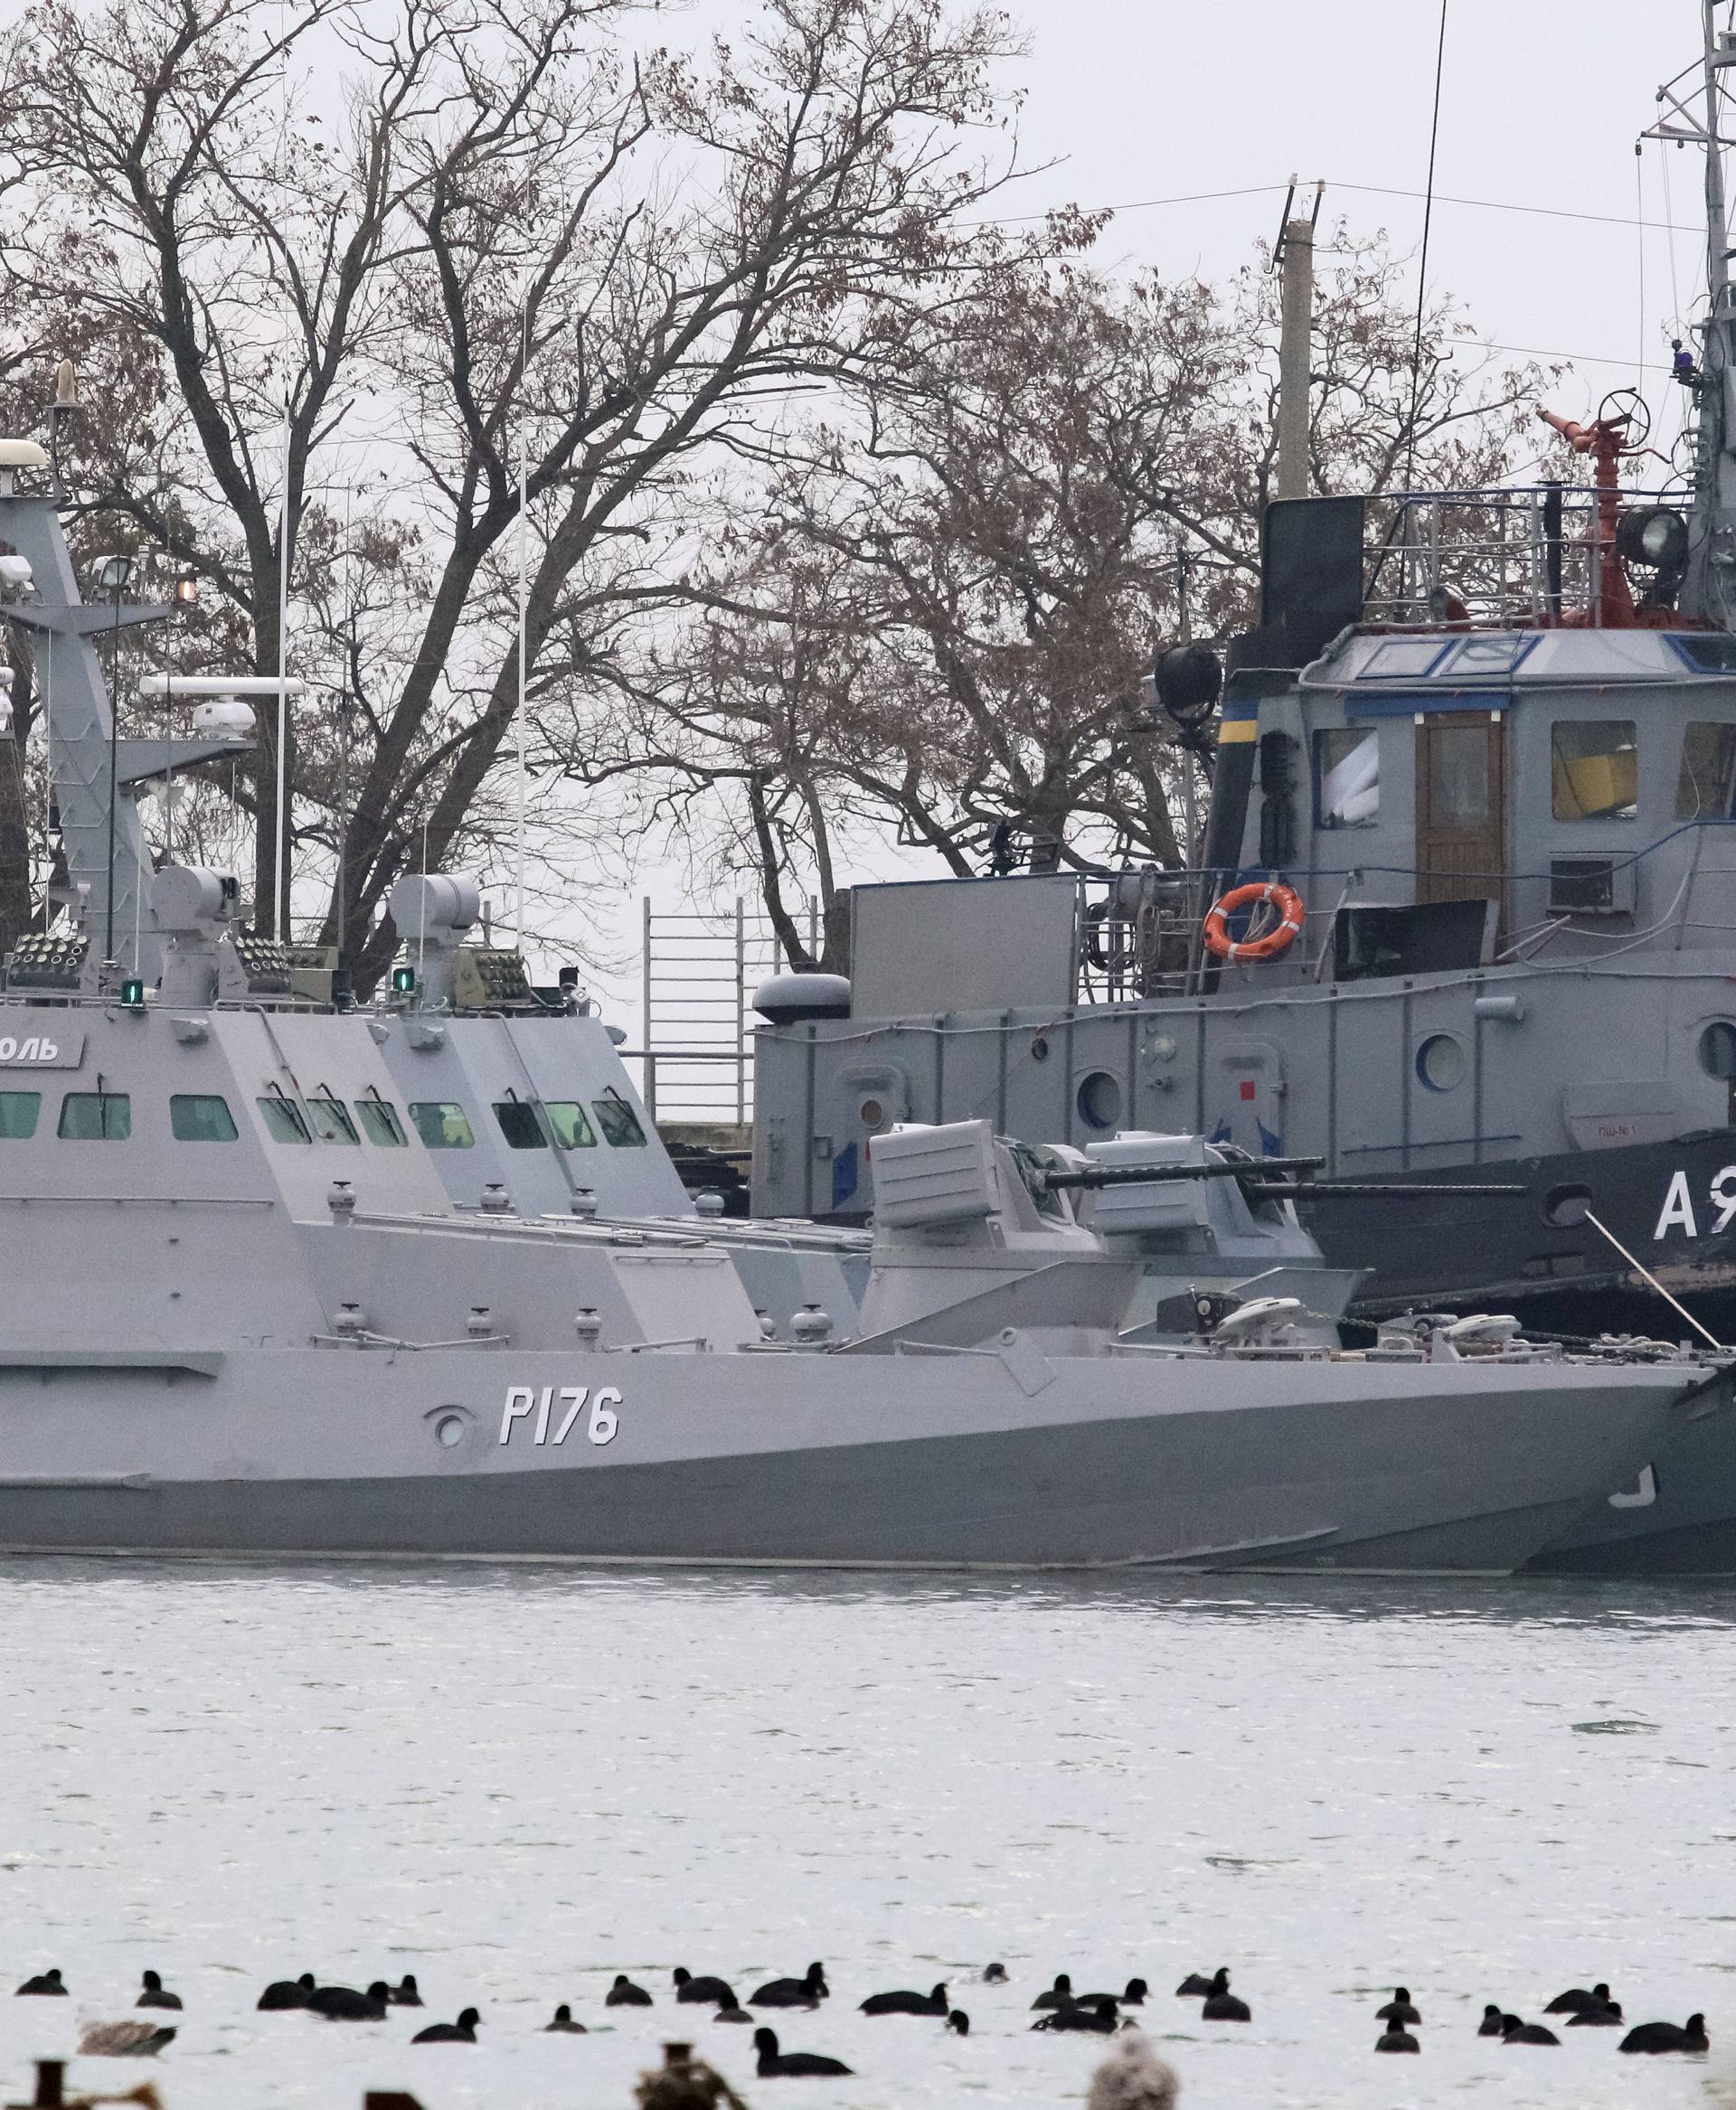 Seized Ukrainian ships, small armoured artillery ship and a tug boat, are seen anchored in a port of Kerch